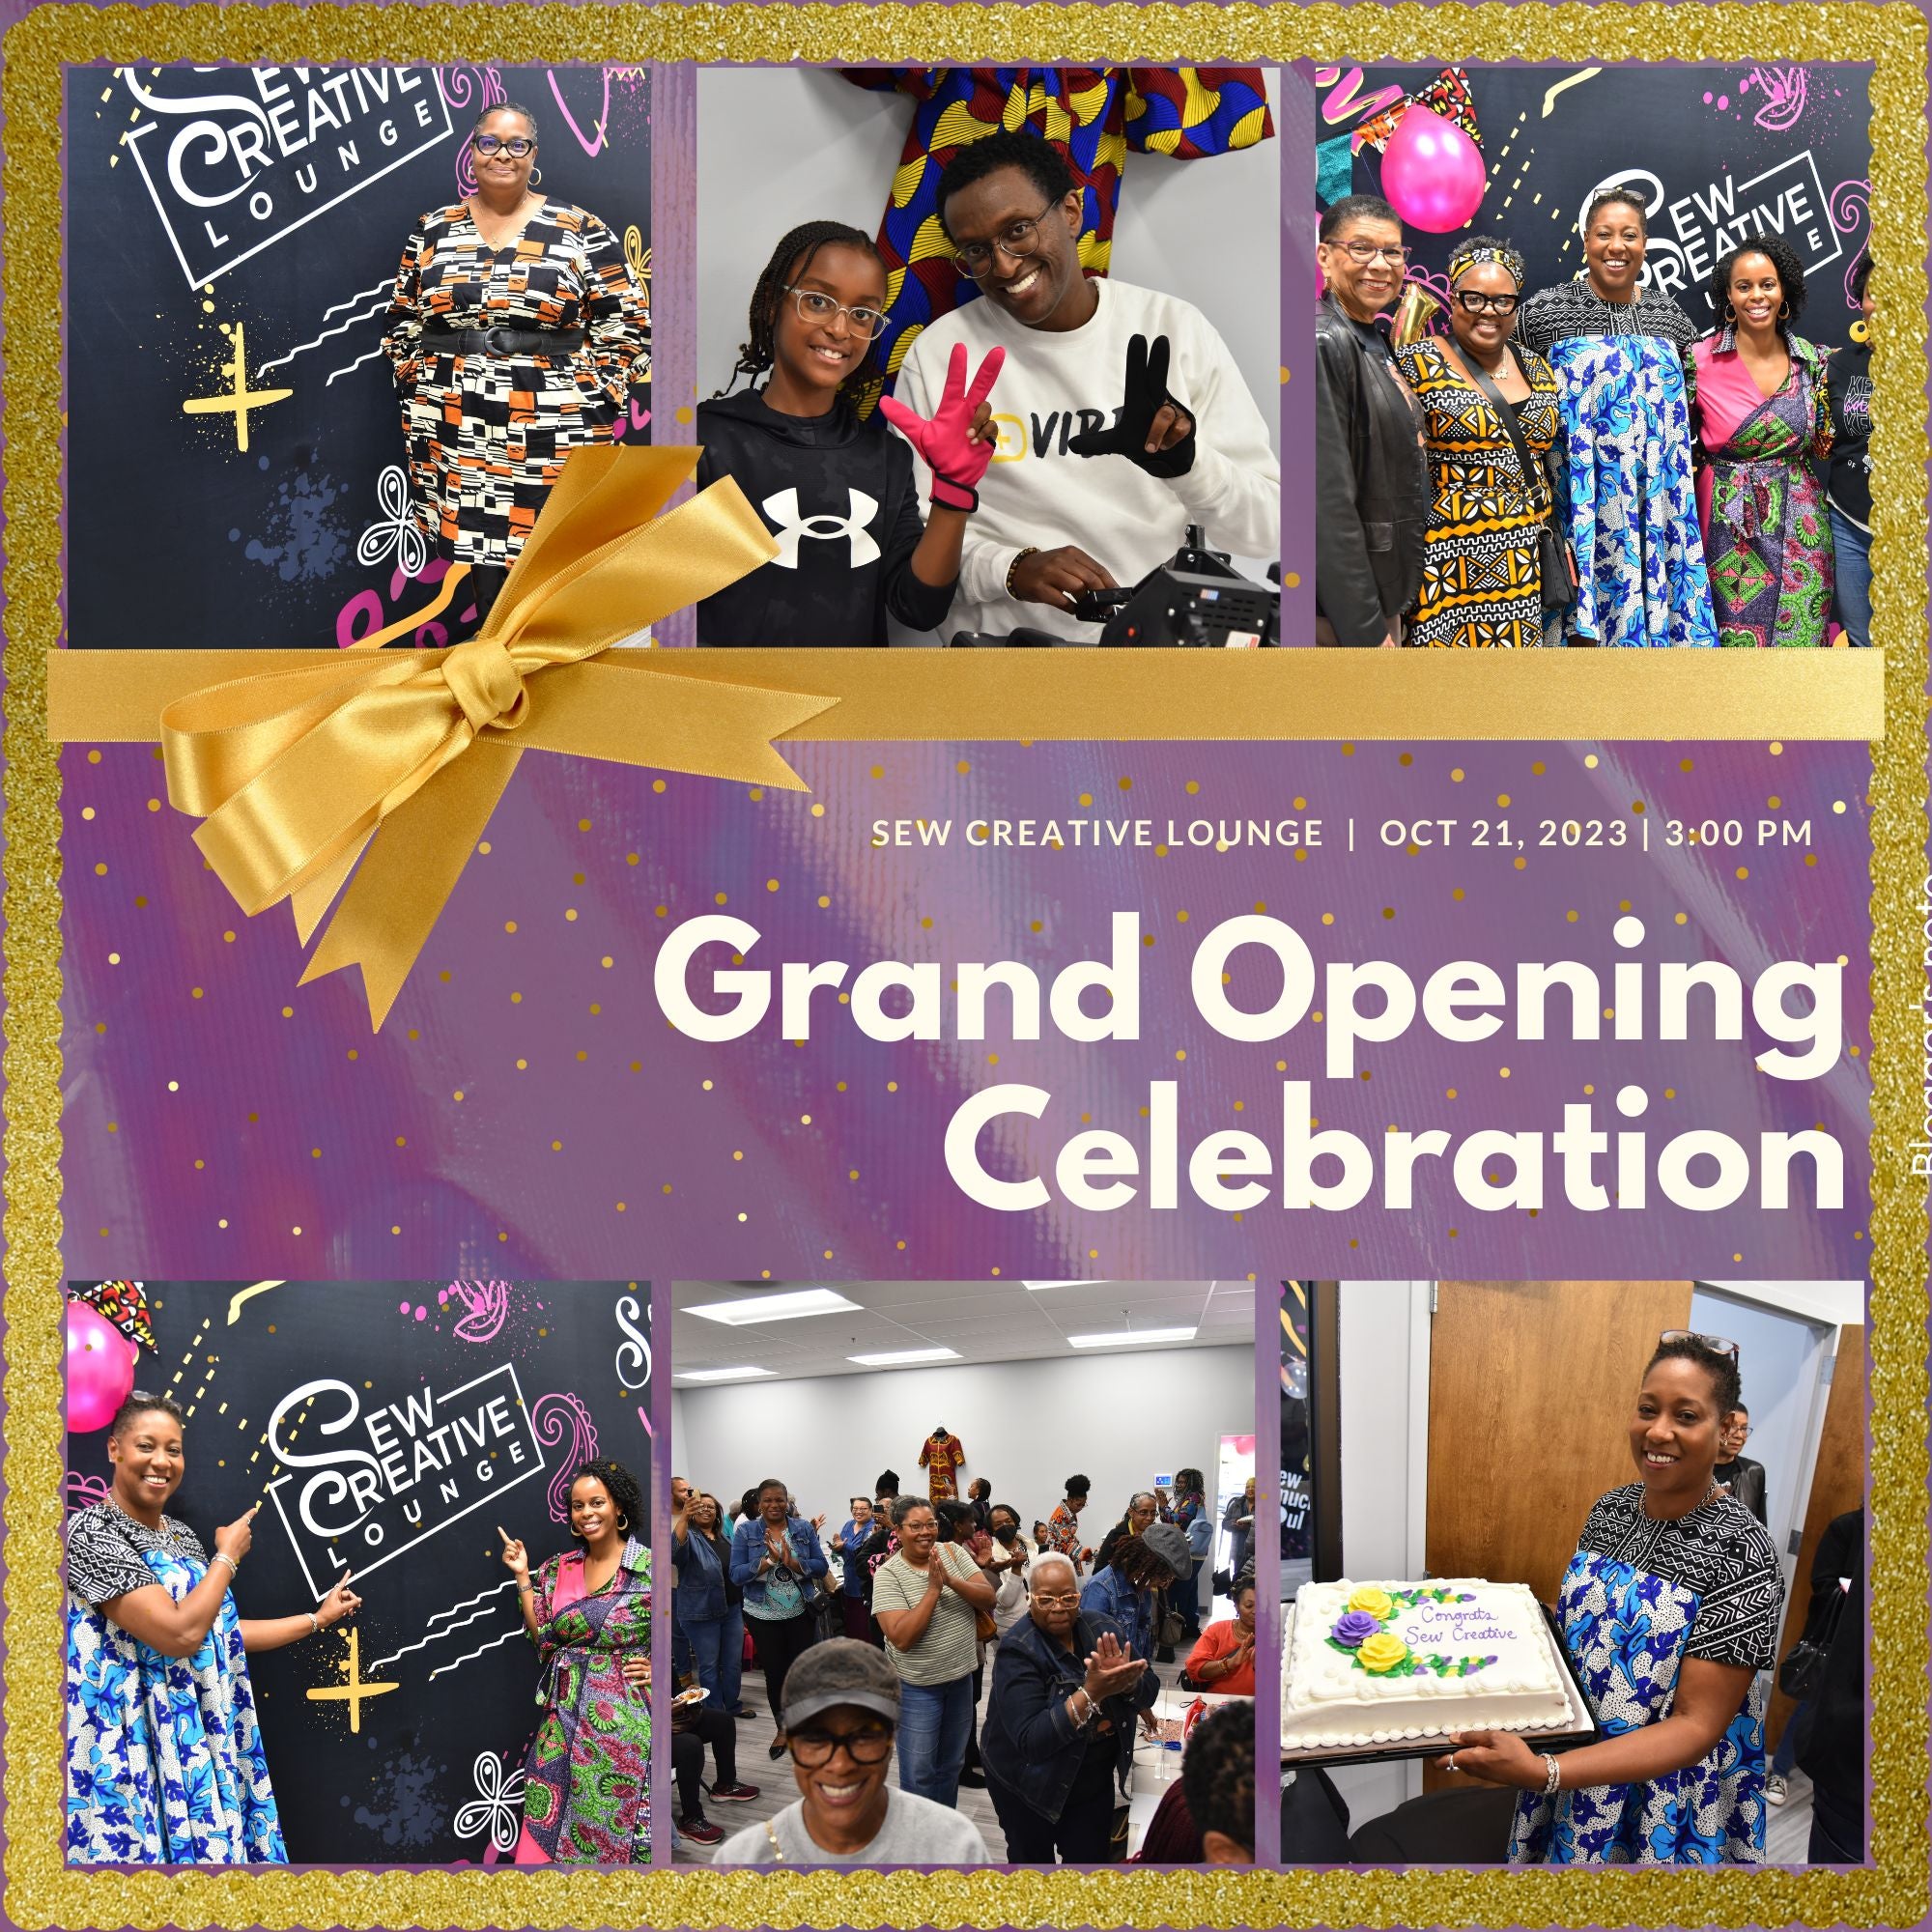 Sew Creative Lounge Grand Opening: A Celebration of Creativity and Community